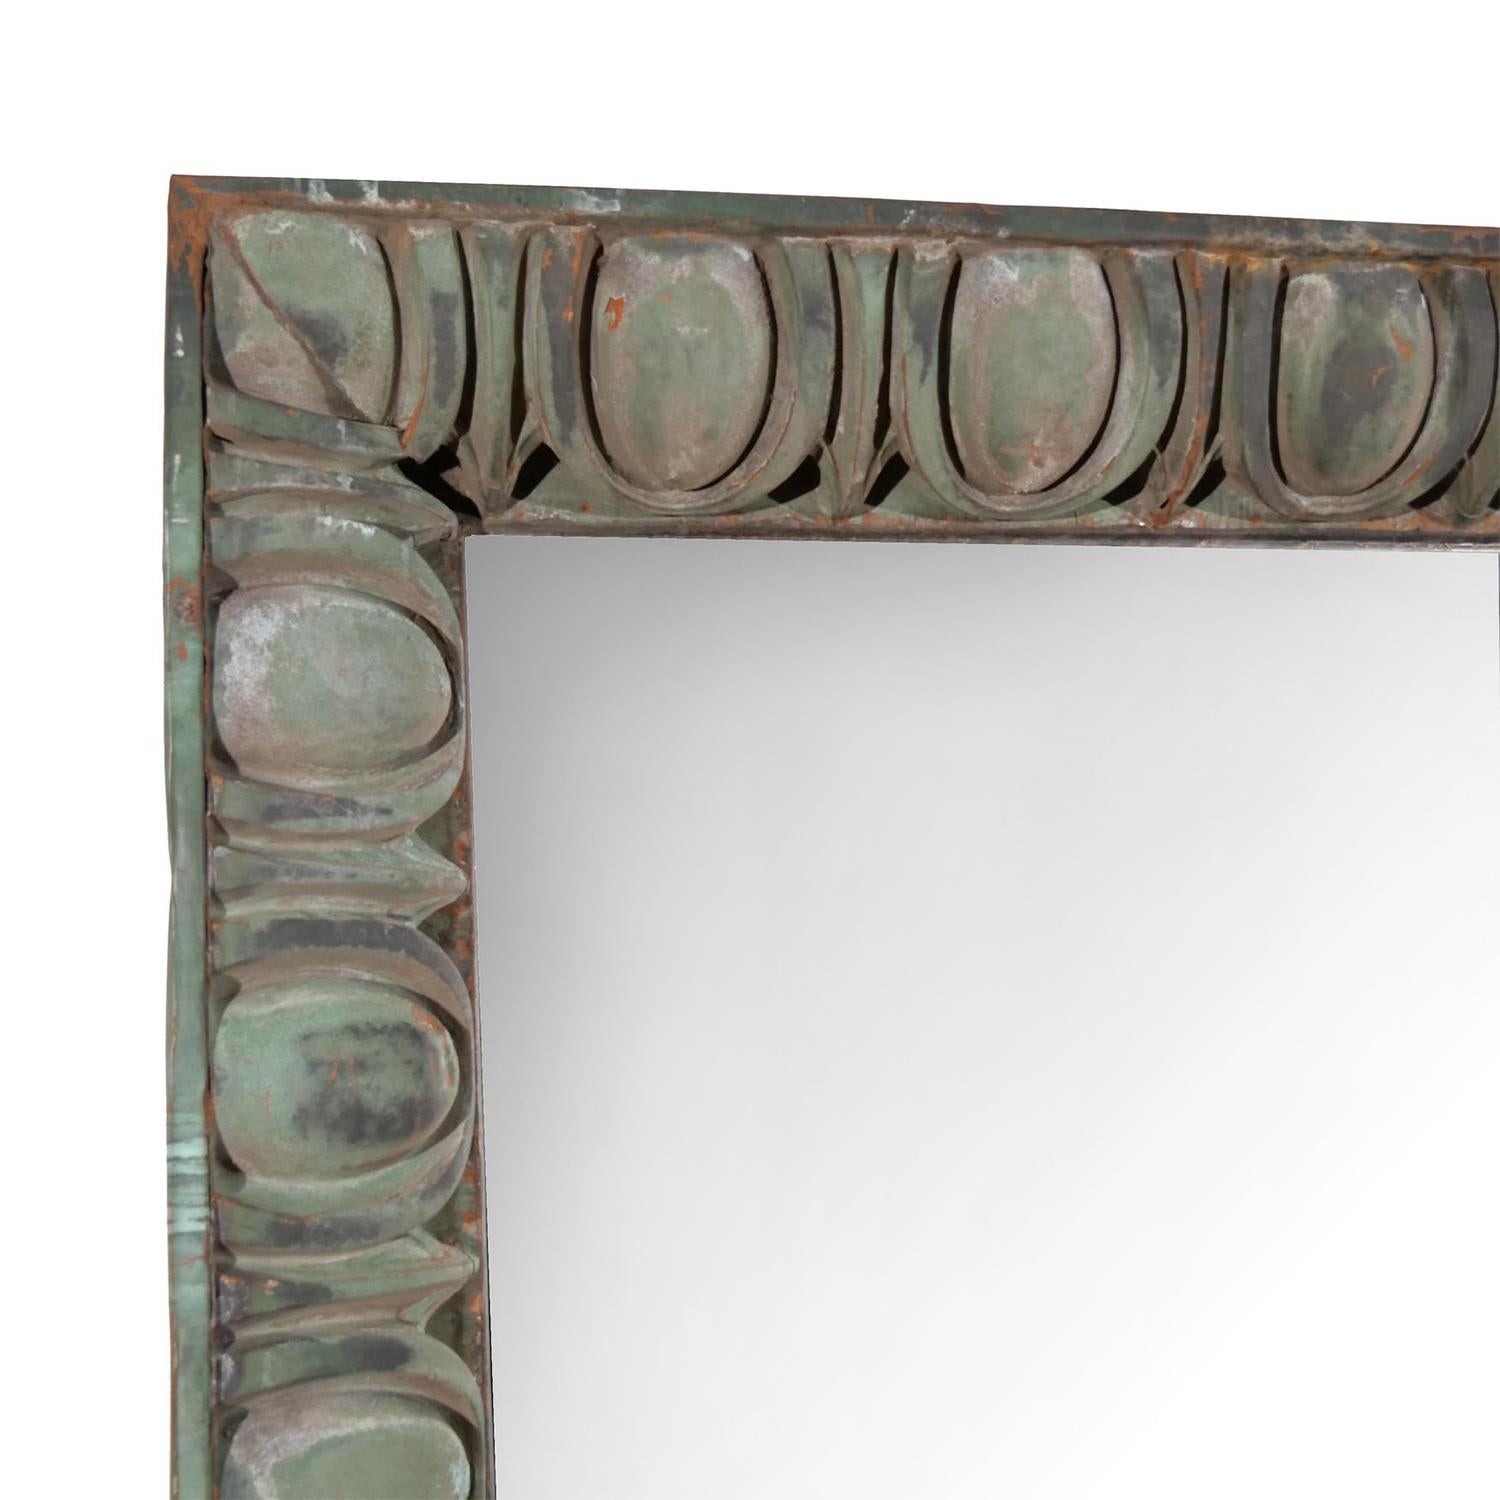 Art Deco 20th Century American Oversized Wall, Floor Mirror from the Rialto Theater